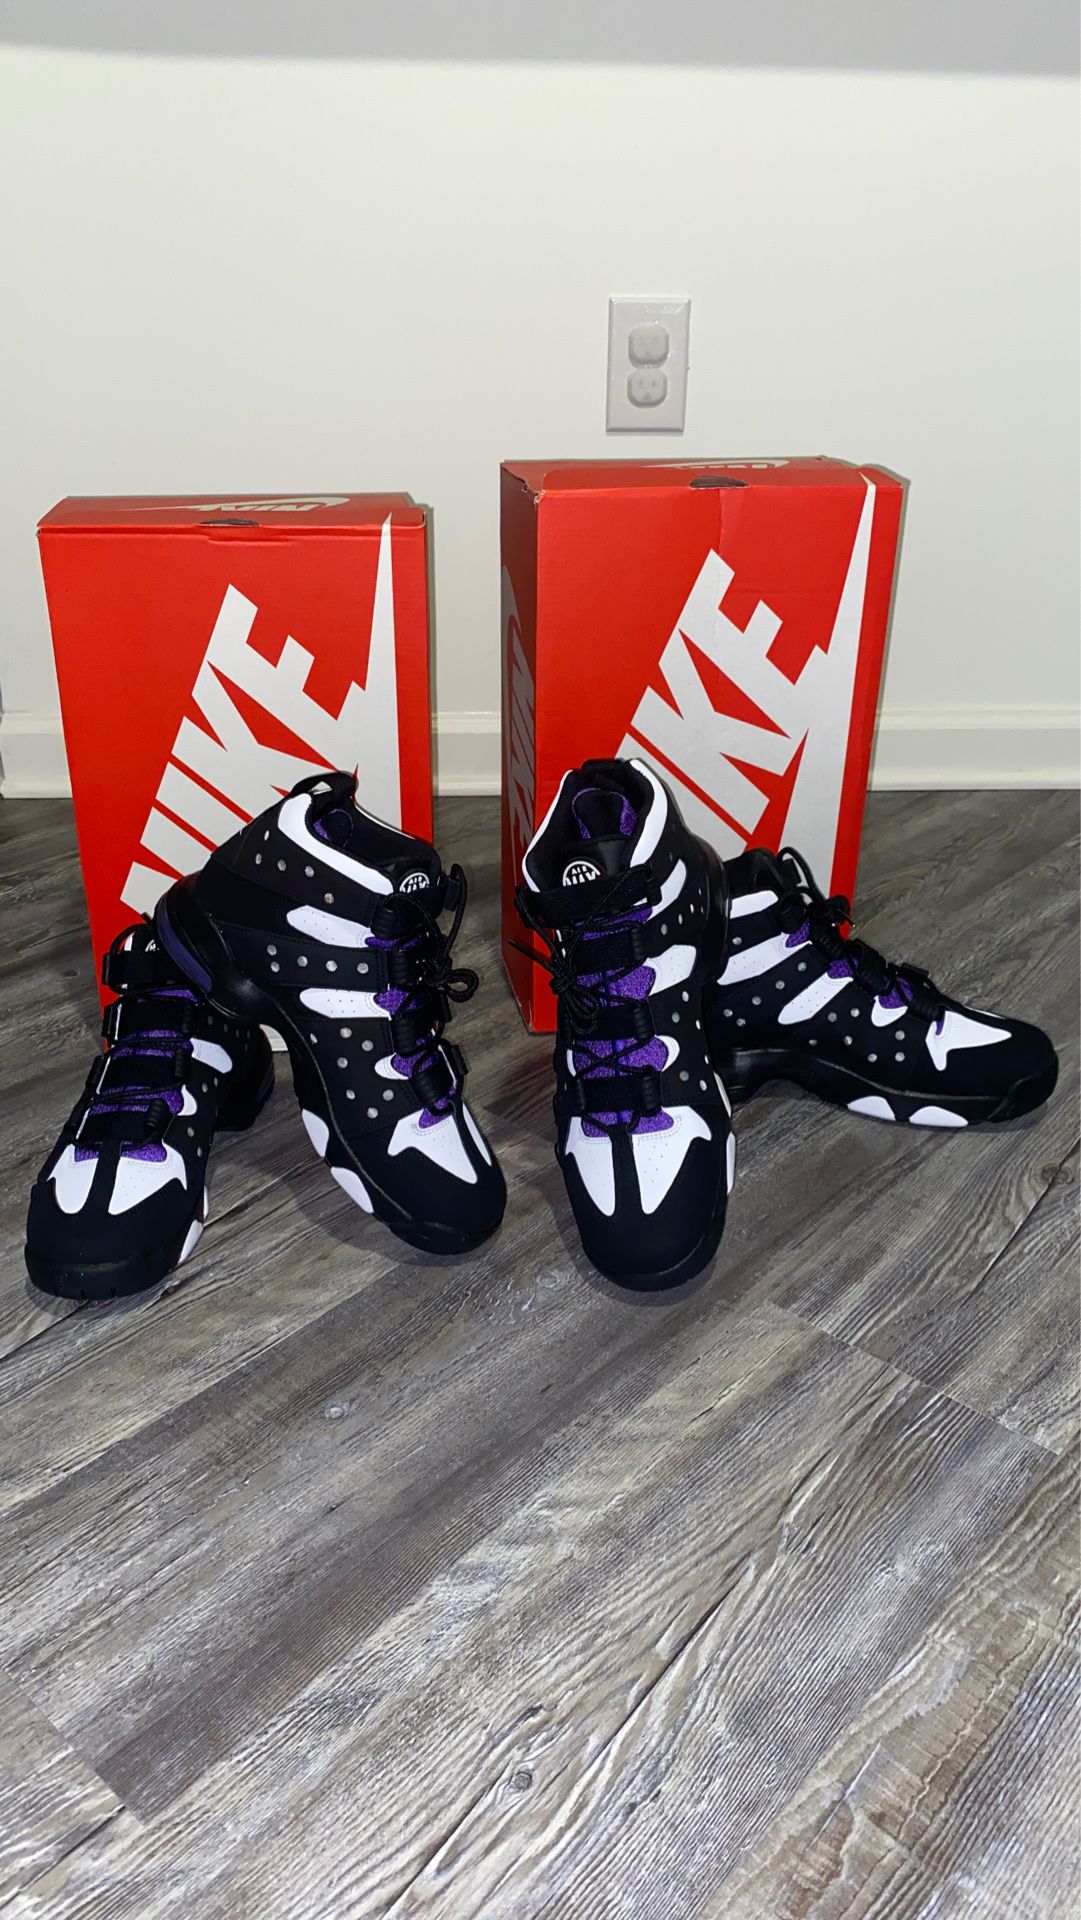 Nike Air Max2 CB ‘94 sizes 8 and 11